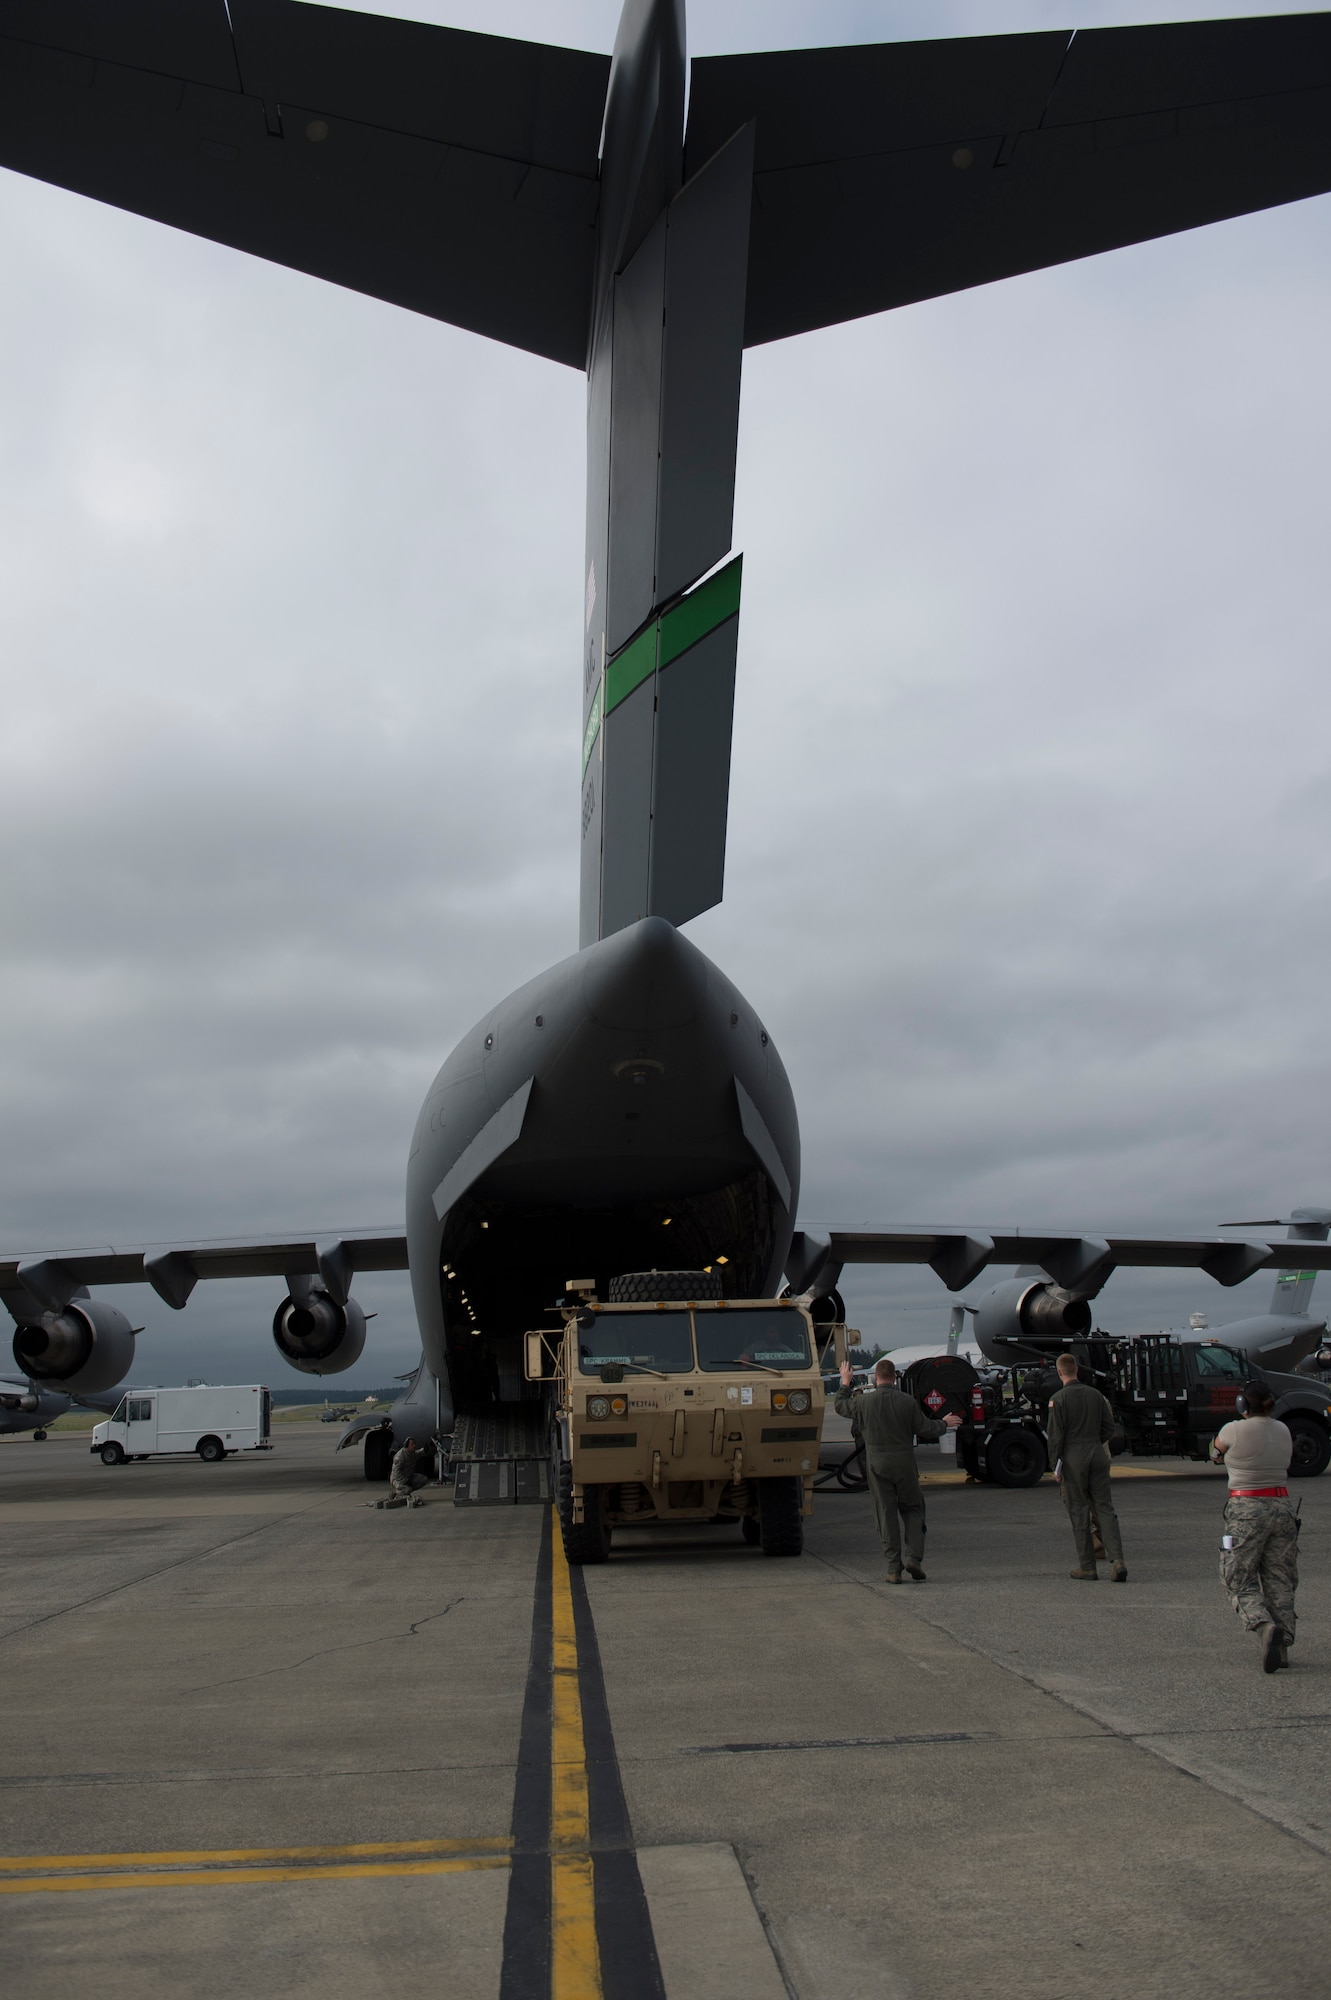 Tech Sgt. Brian Layton, 4th Airlift Squadron loadmaster, and members of the 62nd Aerial Port Squadron work with Army Soldiers to load an Army vehicle into a C-17 Globemaster III, May 21, 2018, at Joint Base Lewis-McChord, Wash. With a cargo compartment 88 feet long and 18 feet high, the C-17 can carry 170,900 pounds of cargo. (U.S. Air Force photo by A1C Sara Hoerichs)